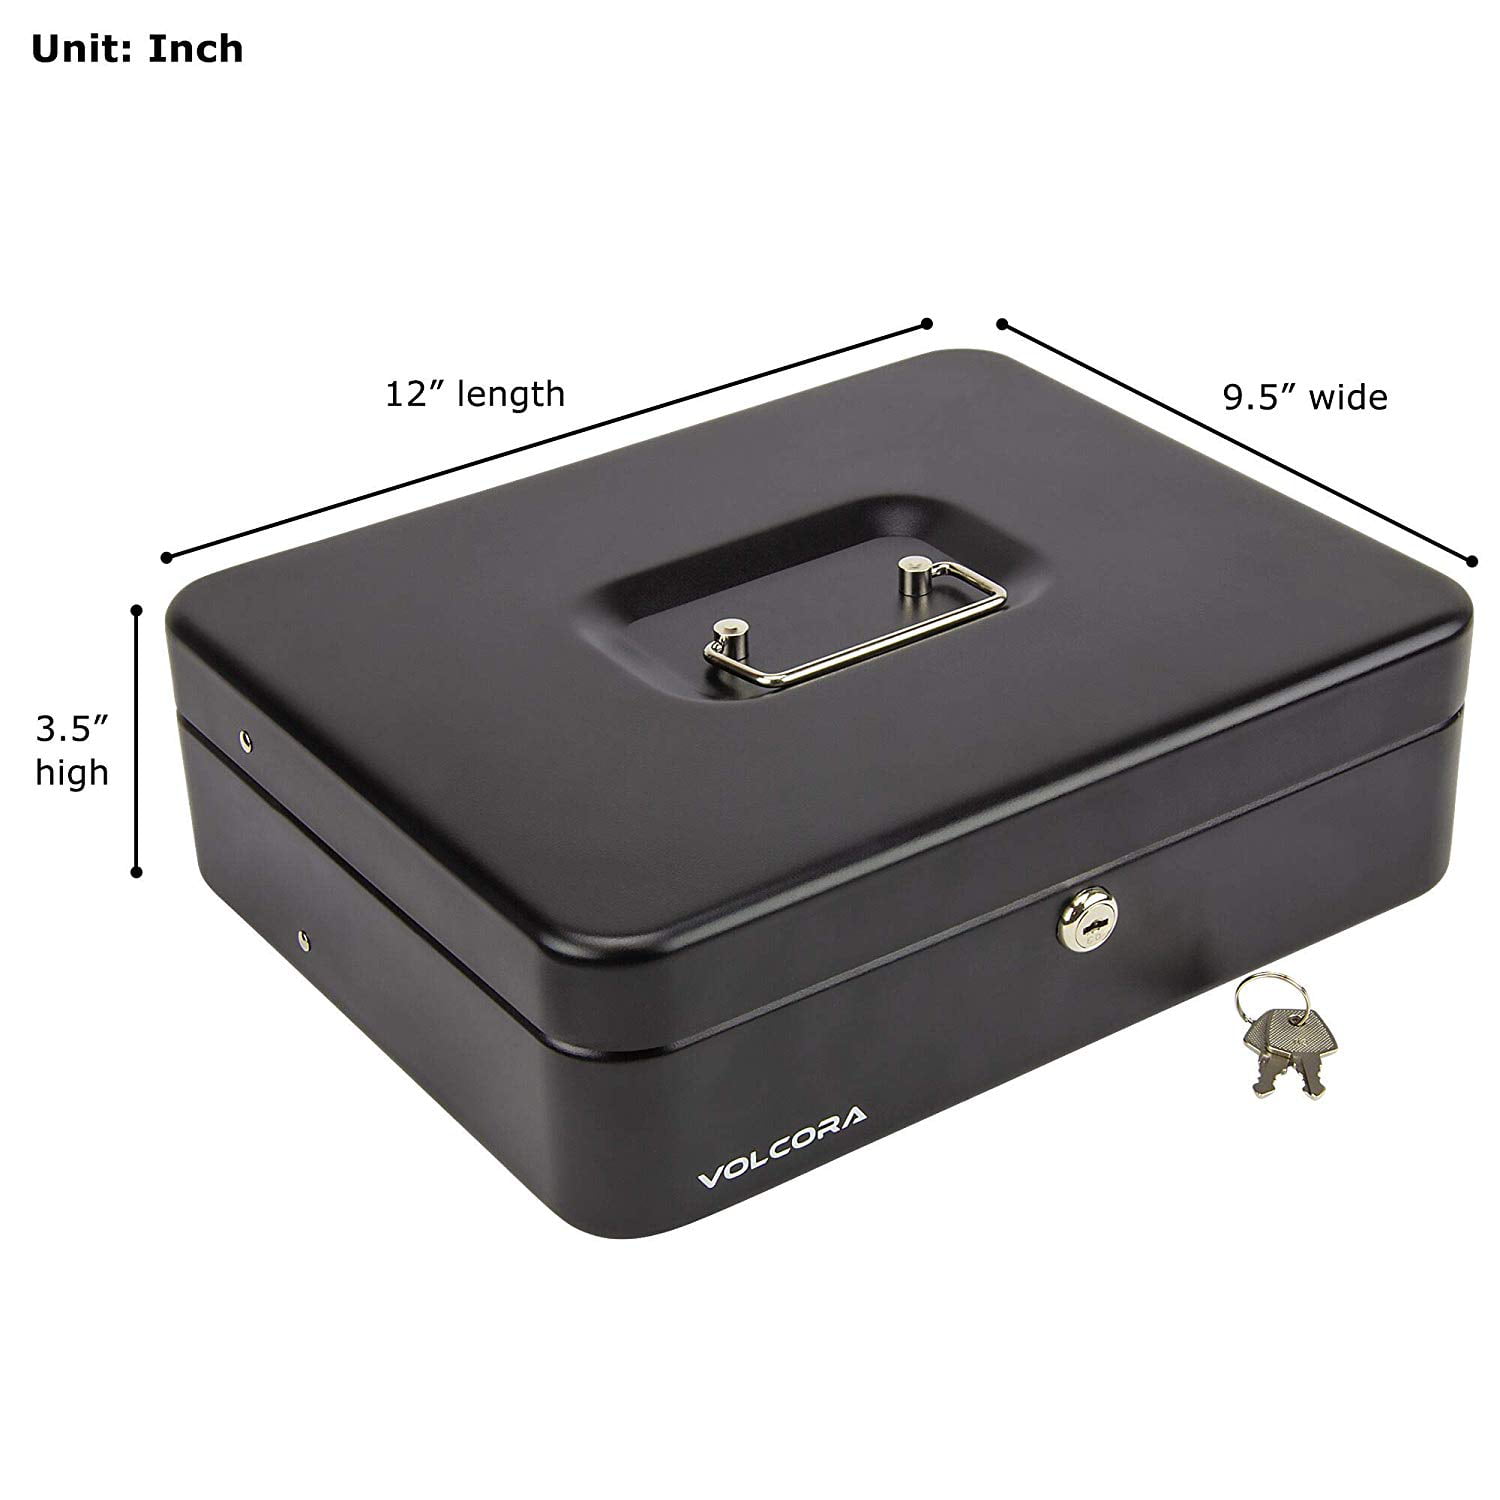 Fundraiser Petty Cash Metal Lockable Storage Box for Change Portable and Compact 2 Keys Tiered Money Coin Tray and Bill Slots Garage Sale Black Steel Cash Box with Safe Key Lock